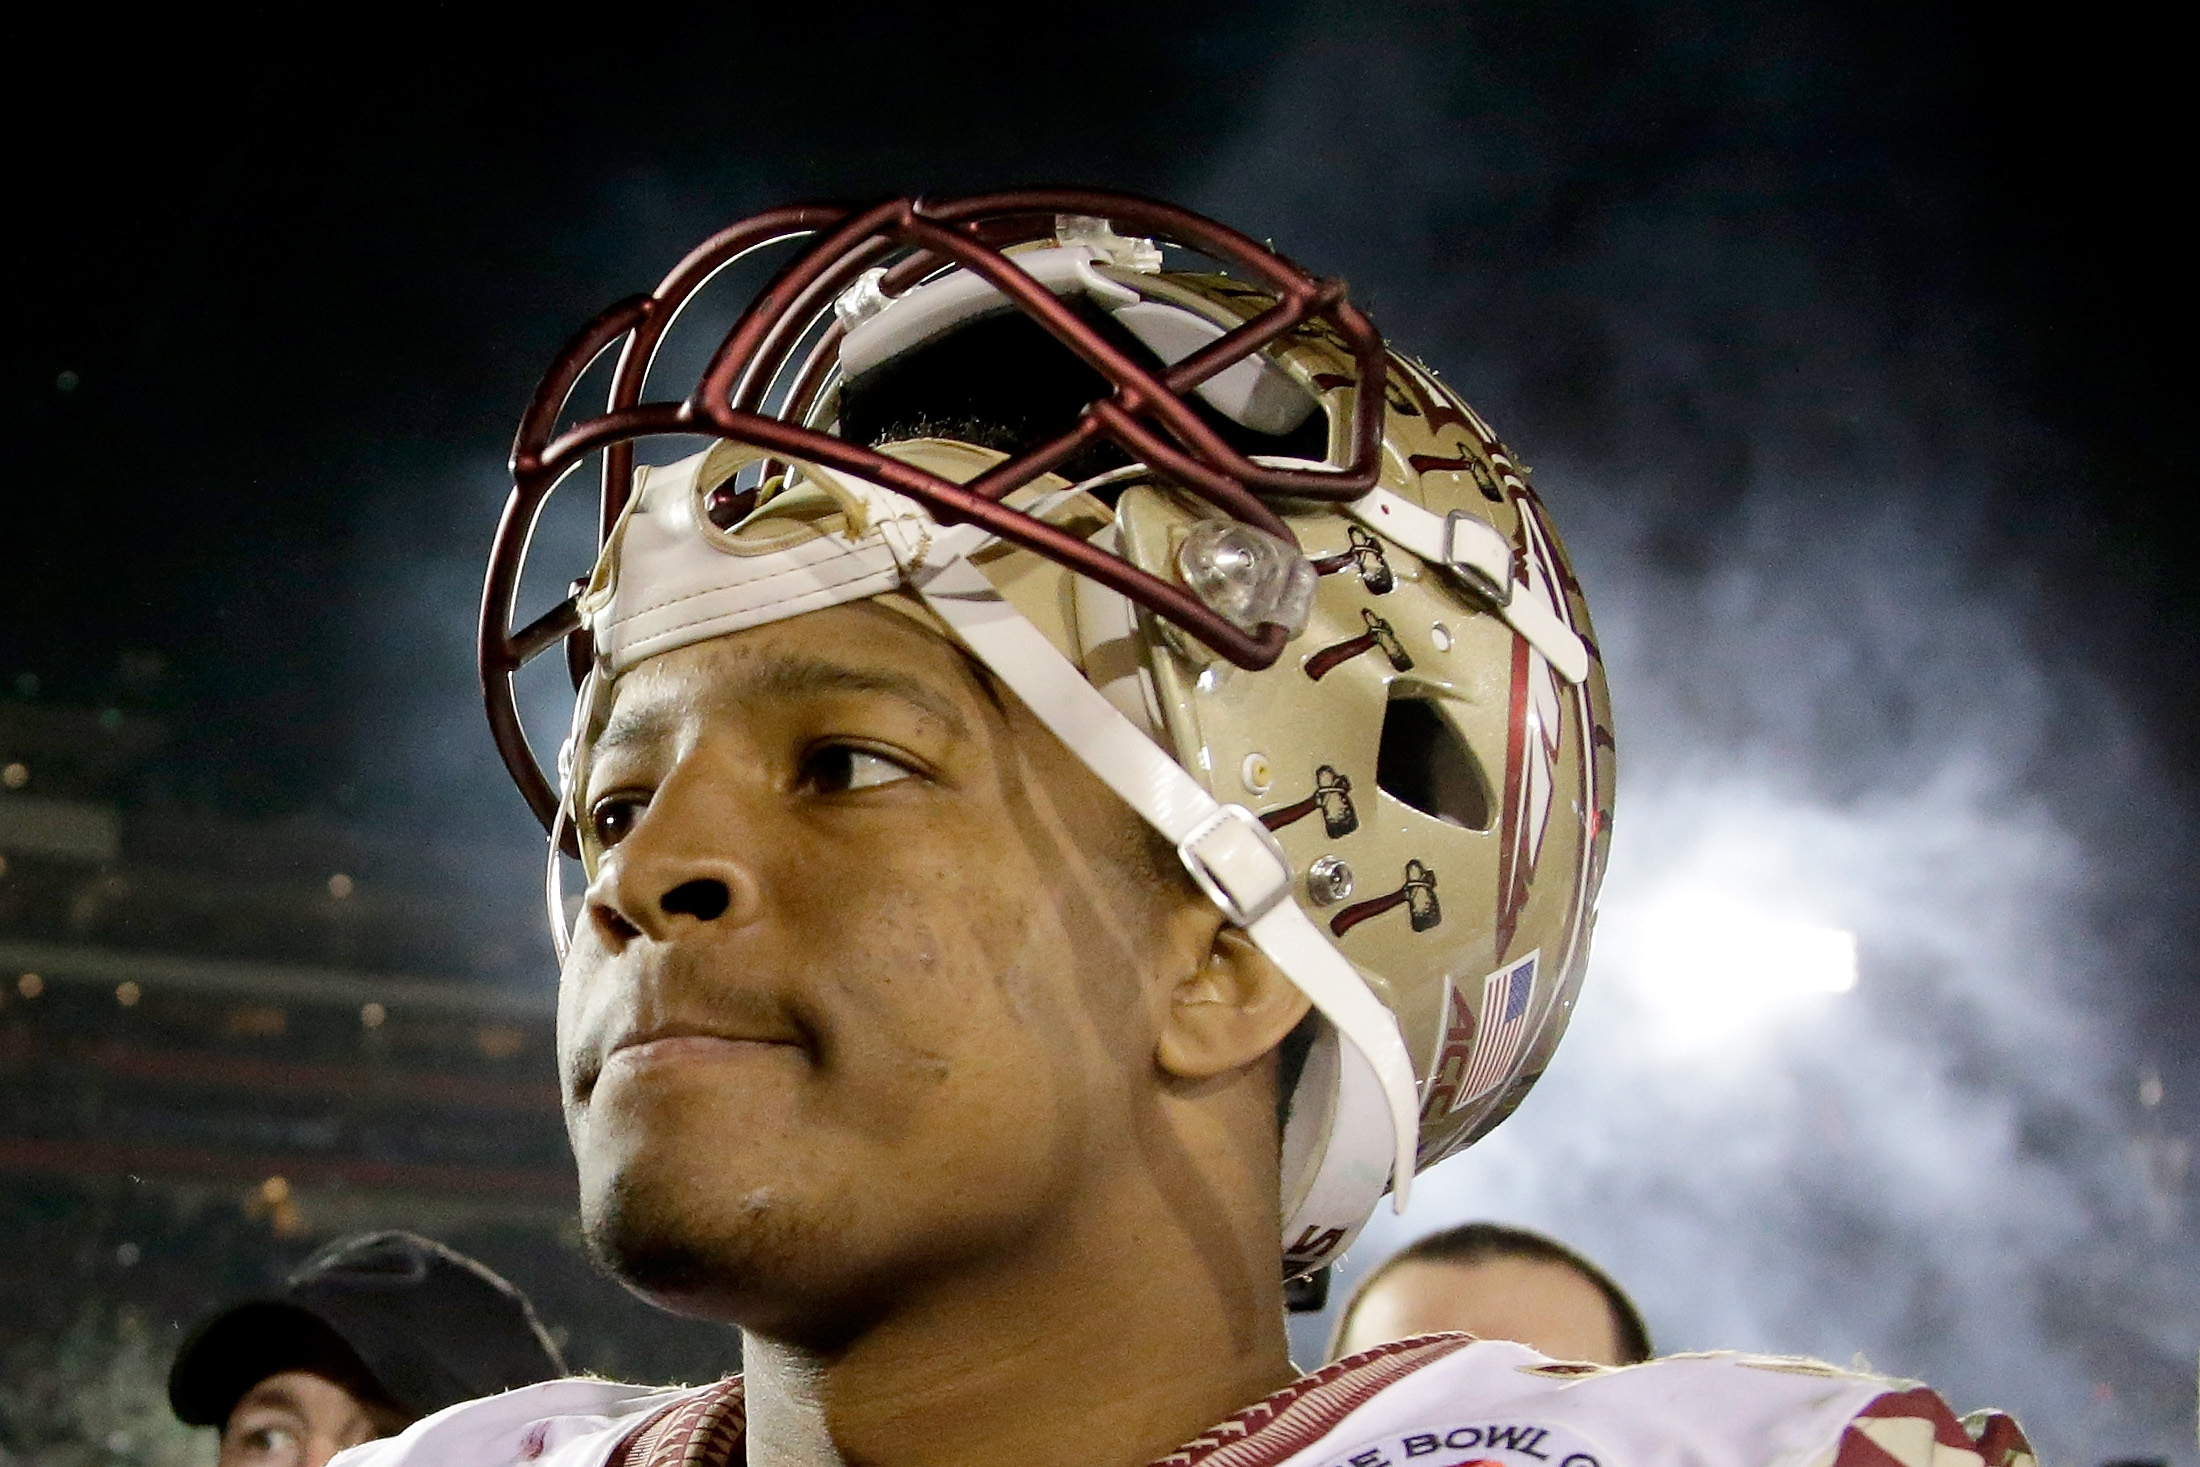 Quarterback Jameis Winston of the Florida State Seminoles reacts after losing 59-20 to the Oregon Ducks at the Rose Bowl on Jan. 1 in California. (Jeff Gross—Getty Images)